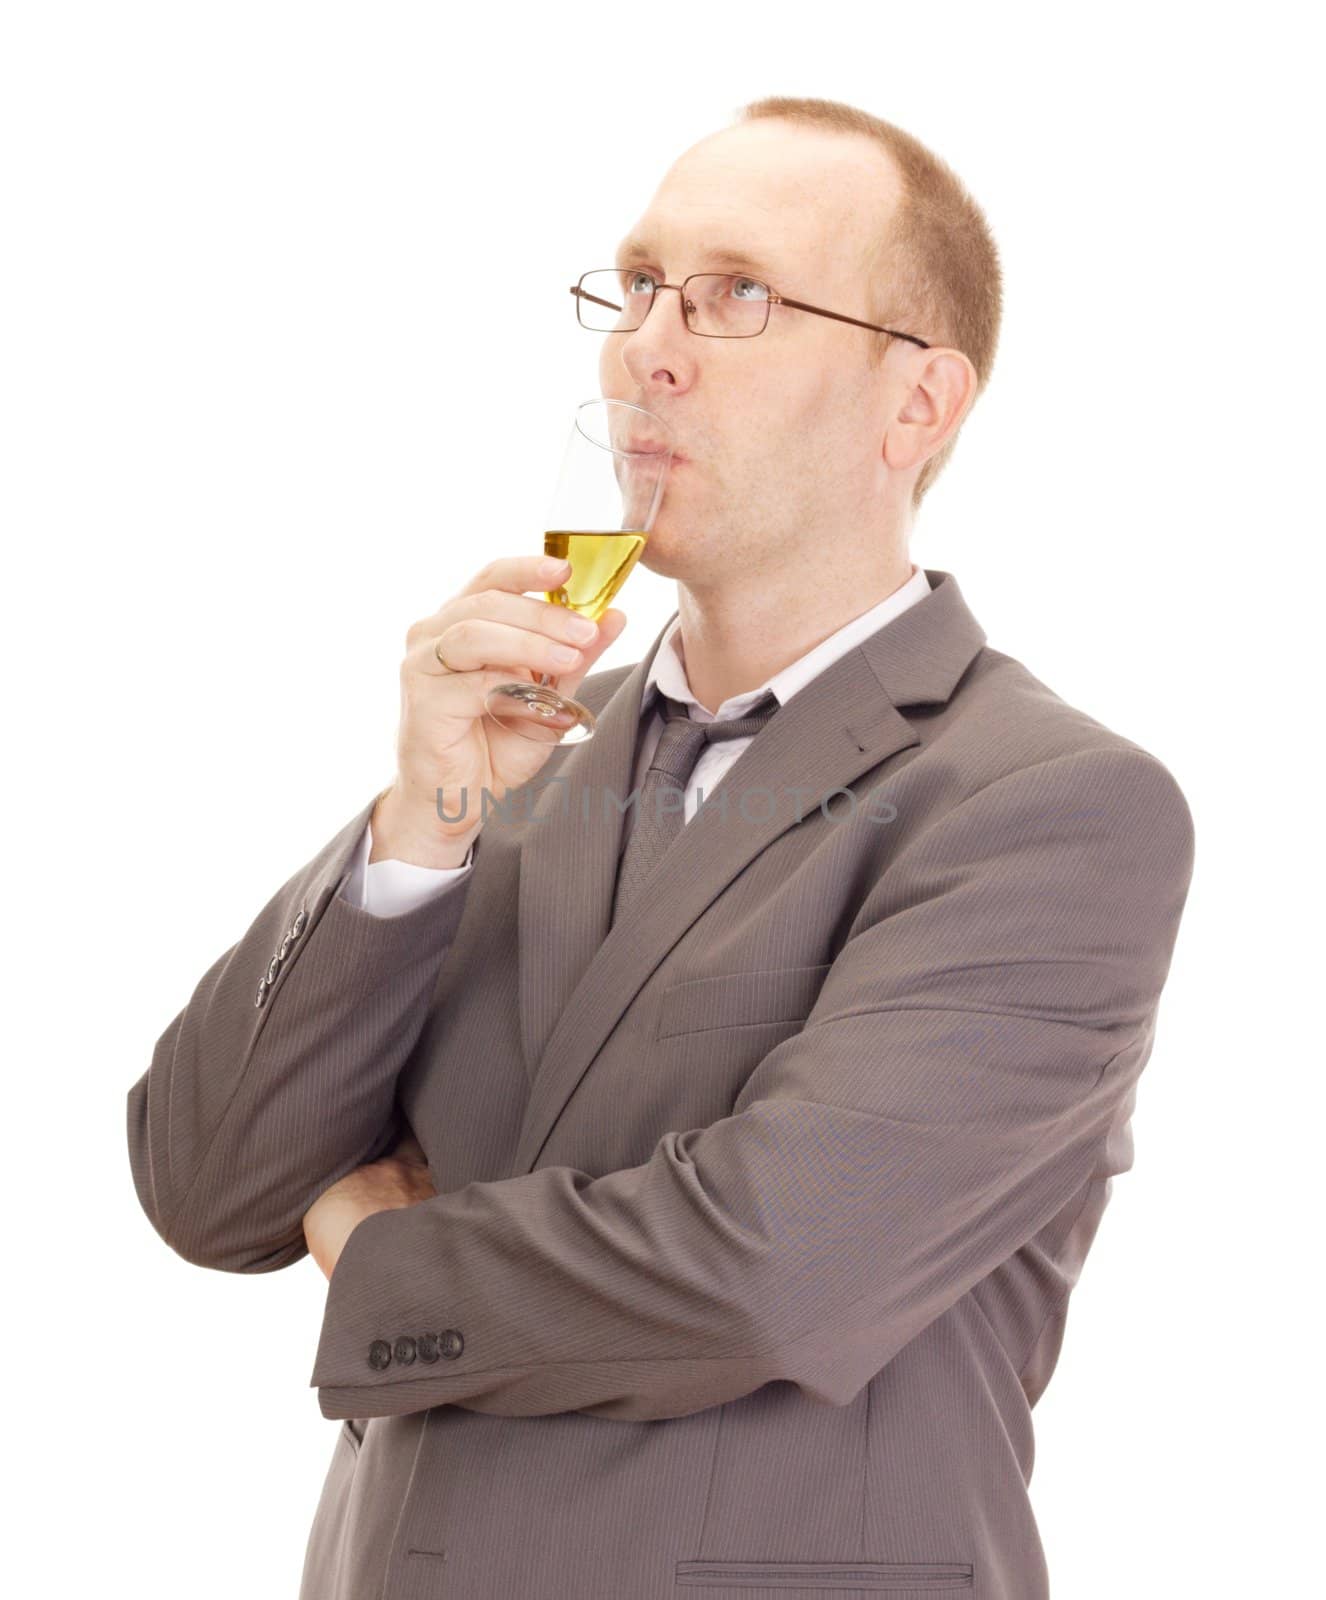 Business person drinking a glass of champagne